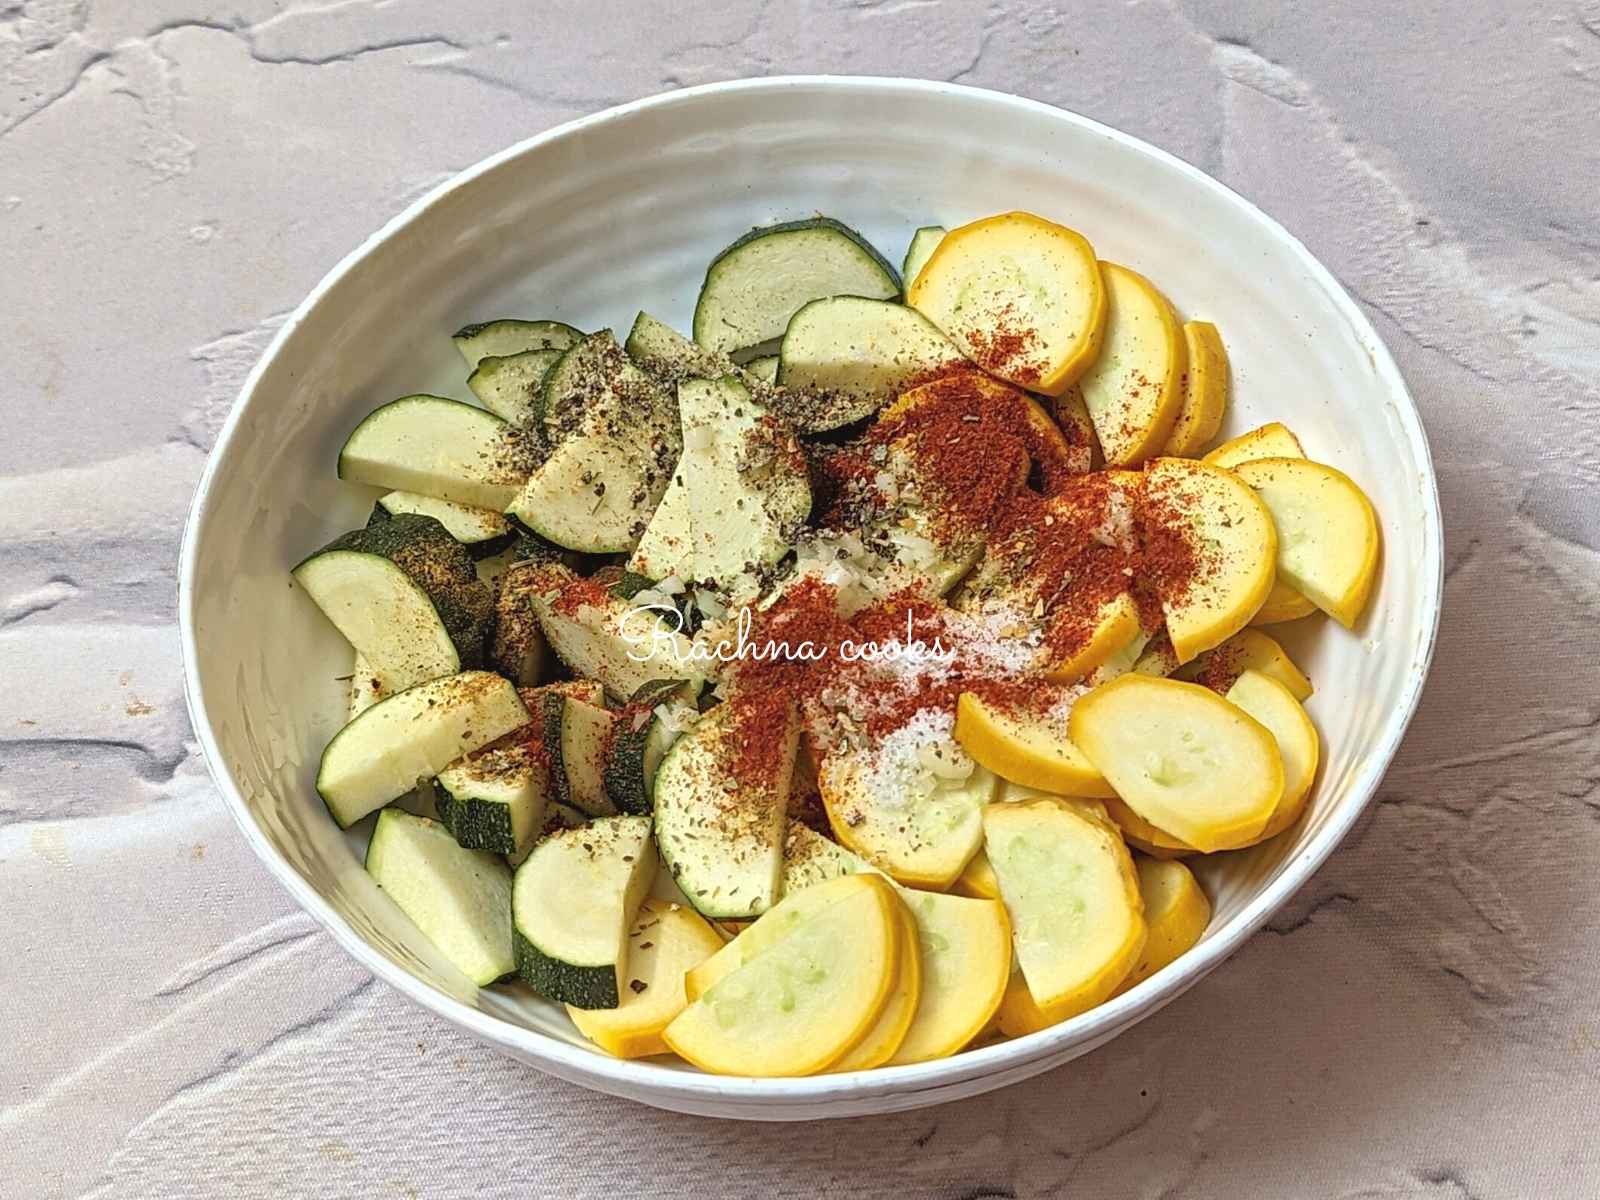 Sliced zucchini and squash with seasonings and oil in a bowl.